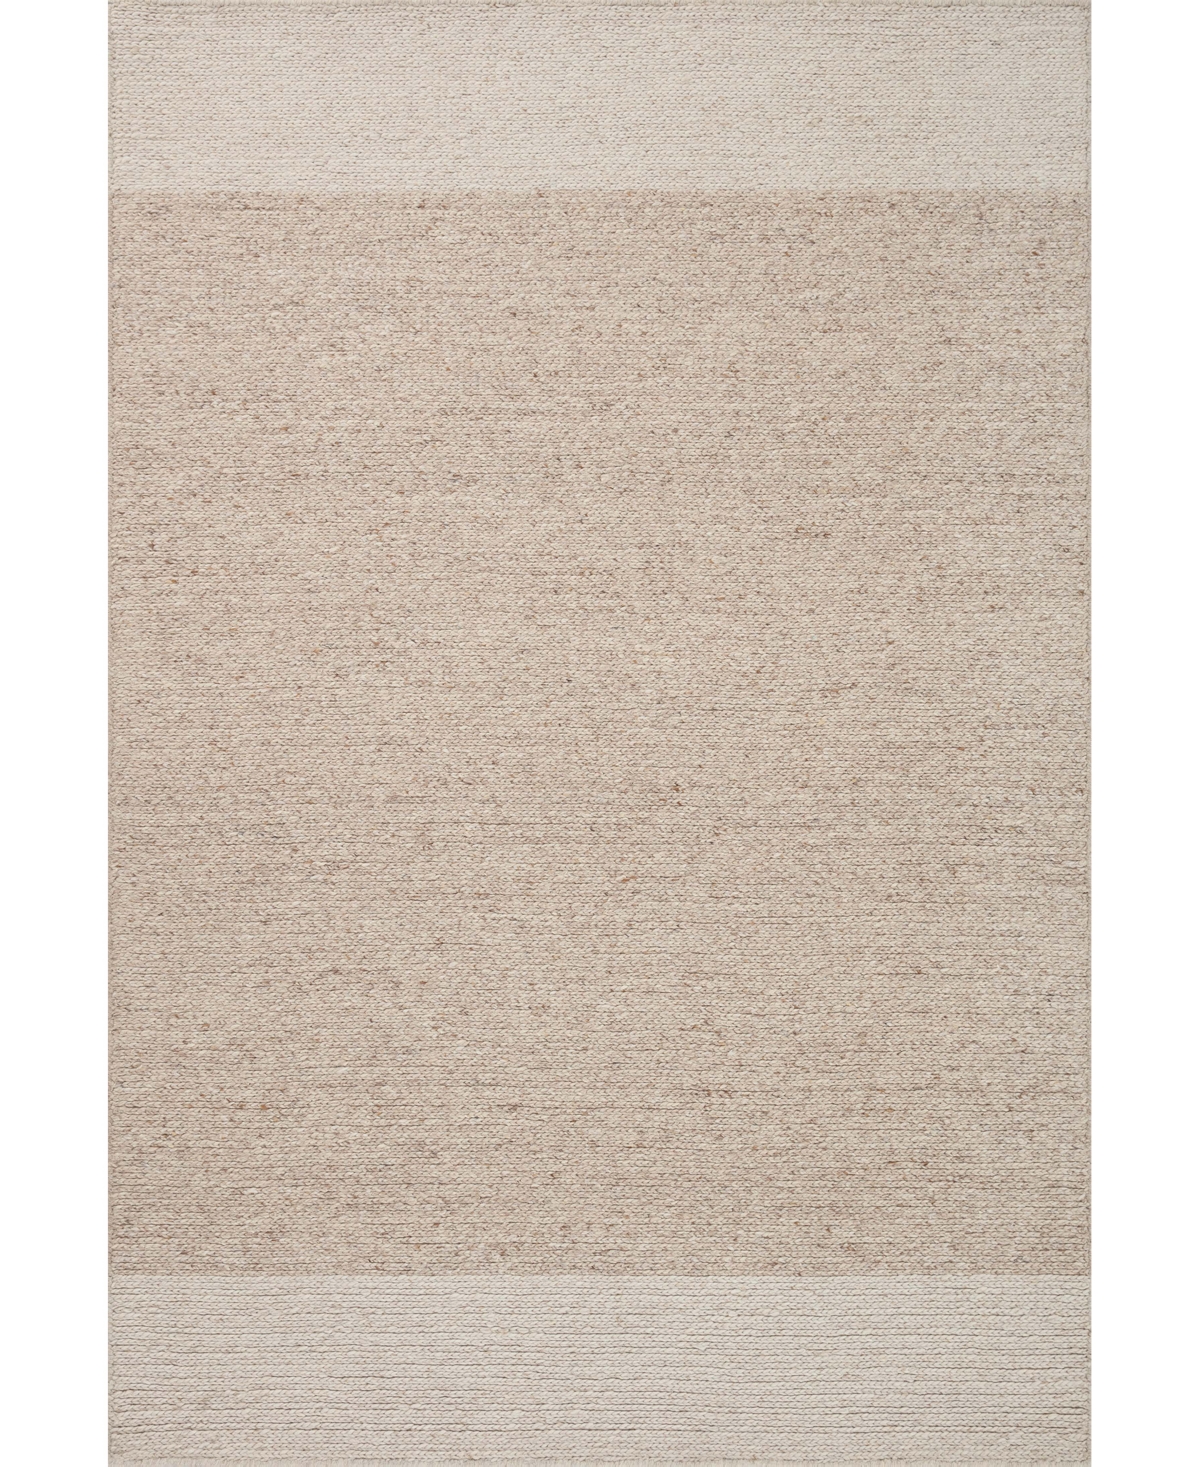 Magnolia Home By Joanna Gaines X Loloi Ashby Ash-05 8'6" X 12' Area Rug In Oatmeal